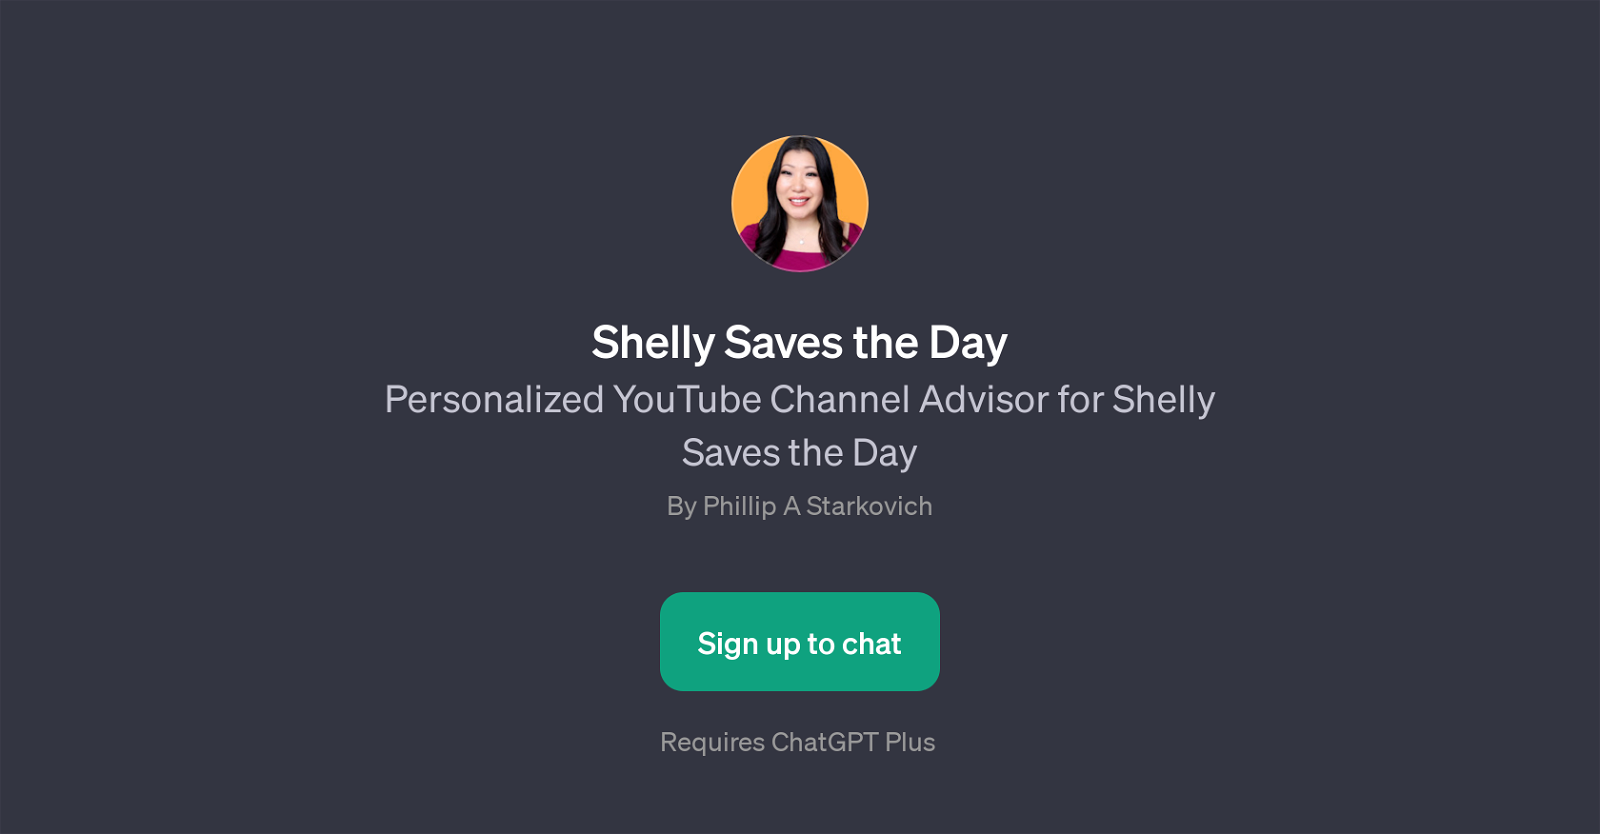 Shelly Saves the Day website